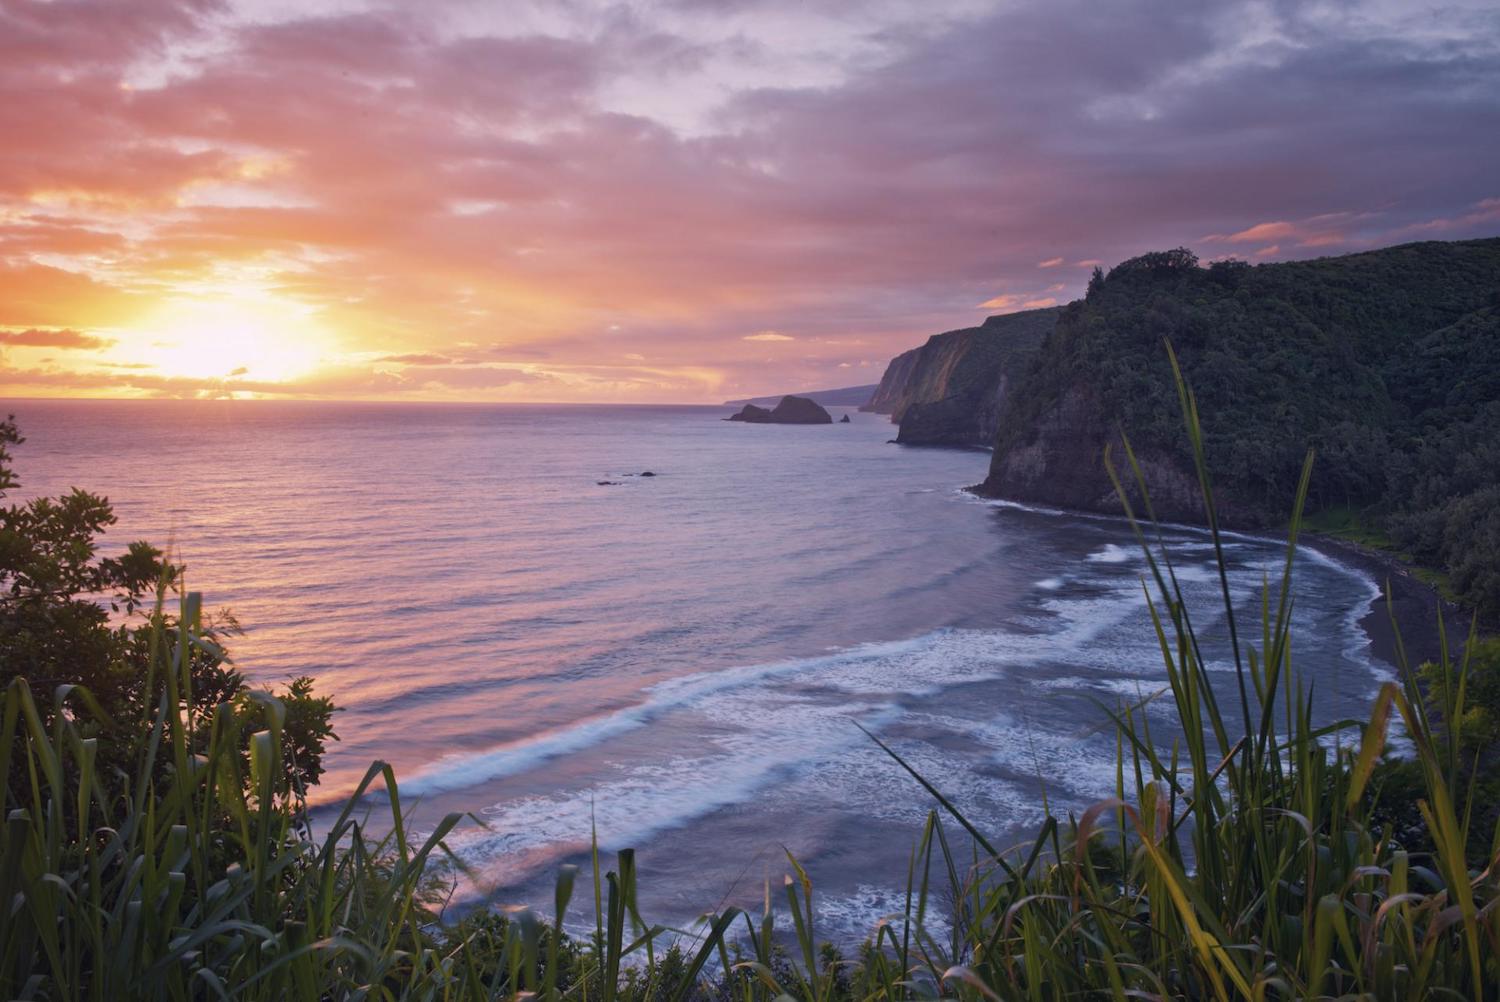 Big Island of Hawaii things to do including the Pololu Valley Hike featuring a view from the cliffs at sunset